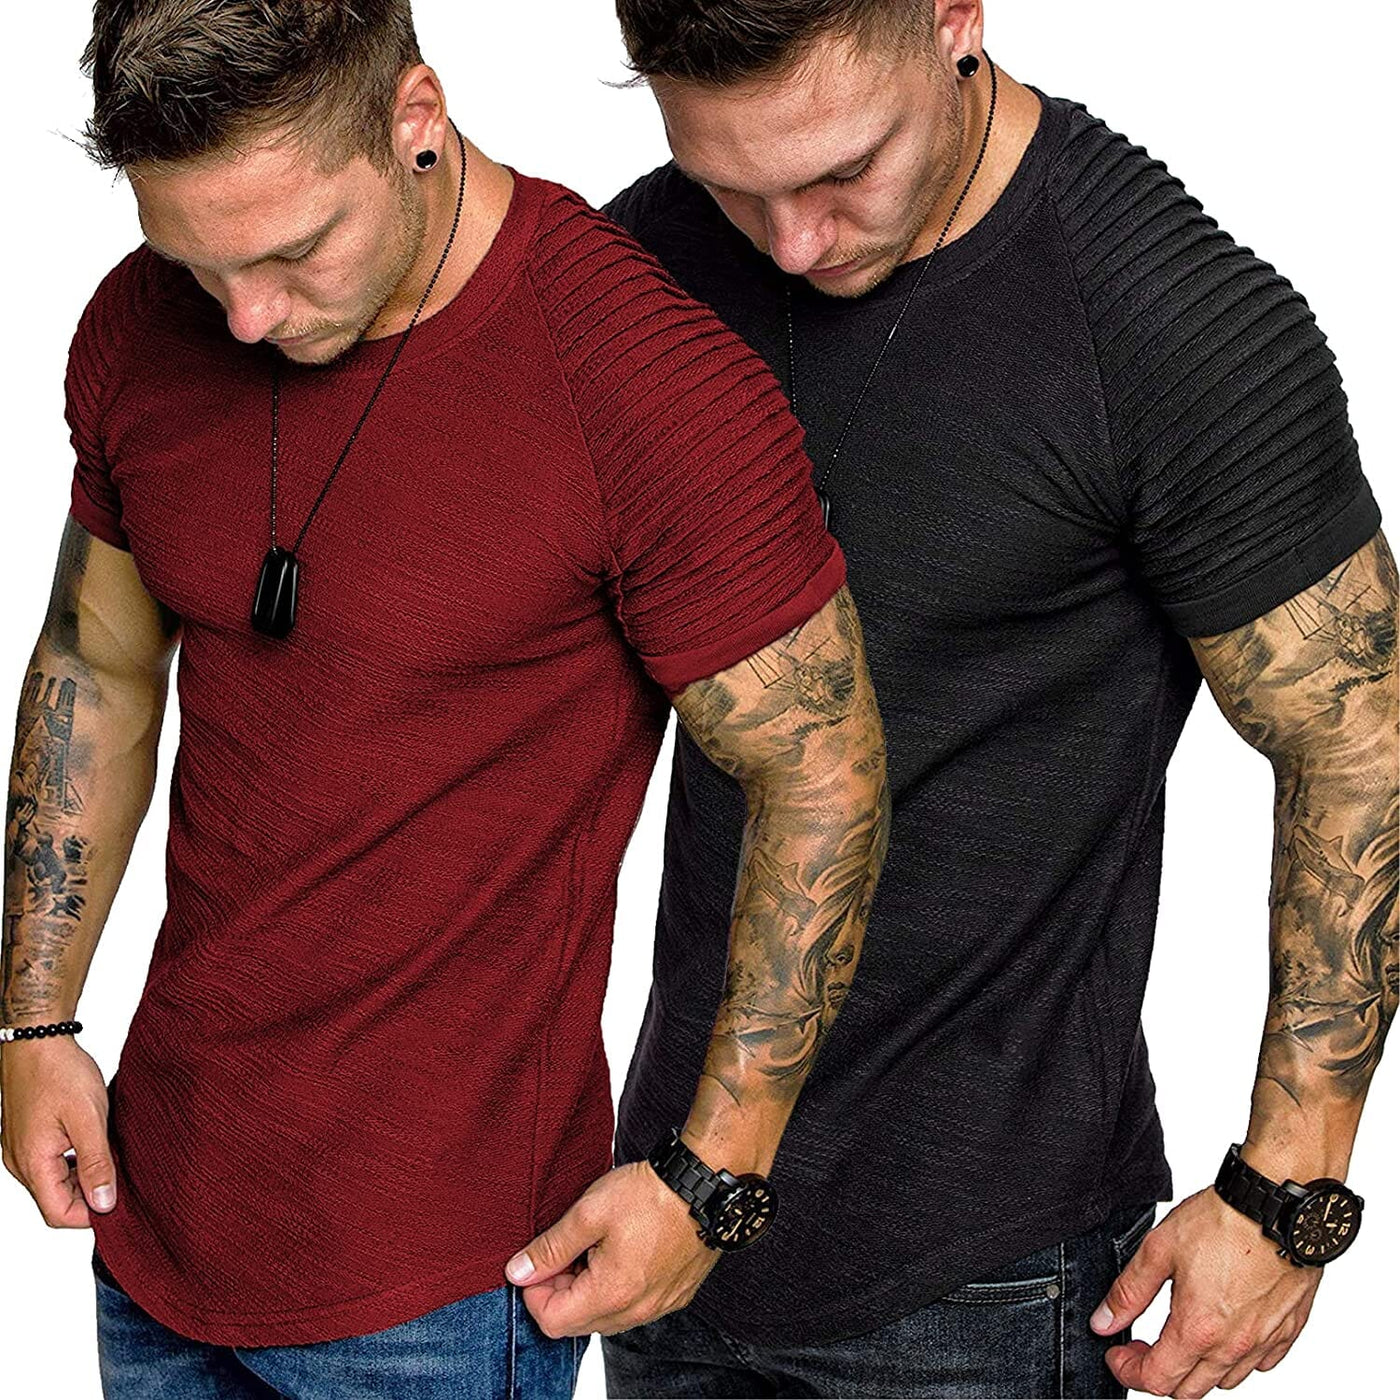 2 Packs Pleats Sleeve Muscle Gym Tee (US Only) T-Shirt COOFANDY Store Black/Wine Red S 